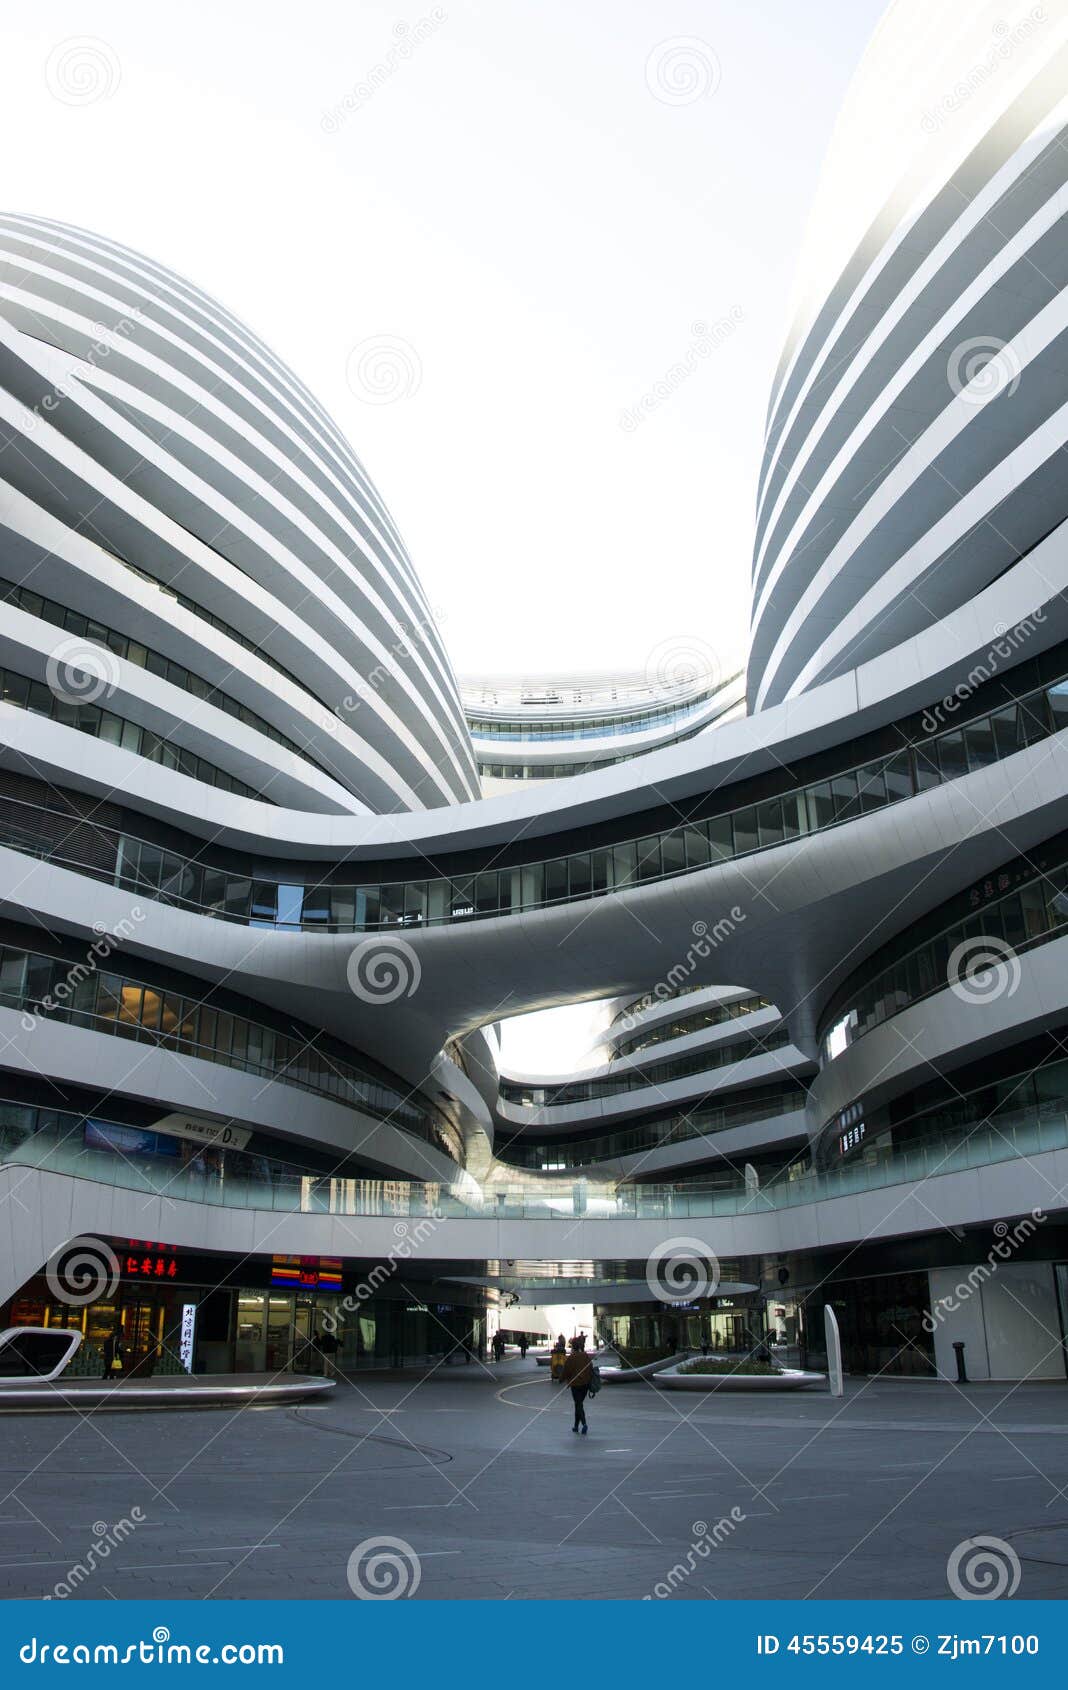 In Asia, China, Beijing, SOHO, the Milky Way, Modern Architecture ...